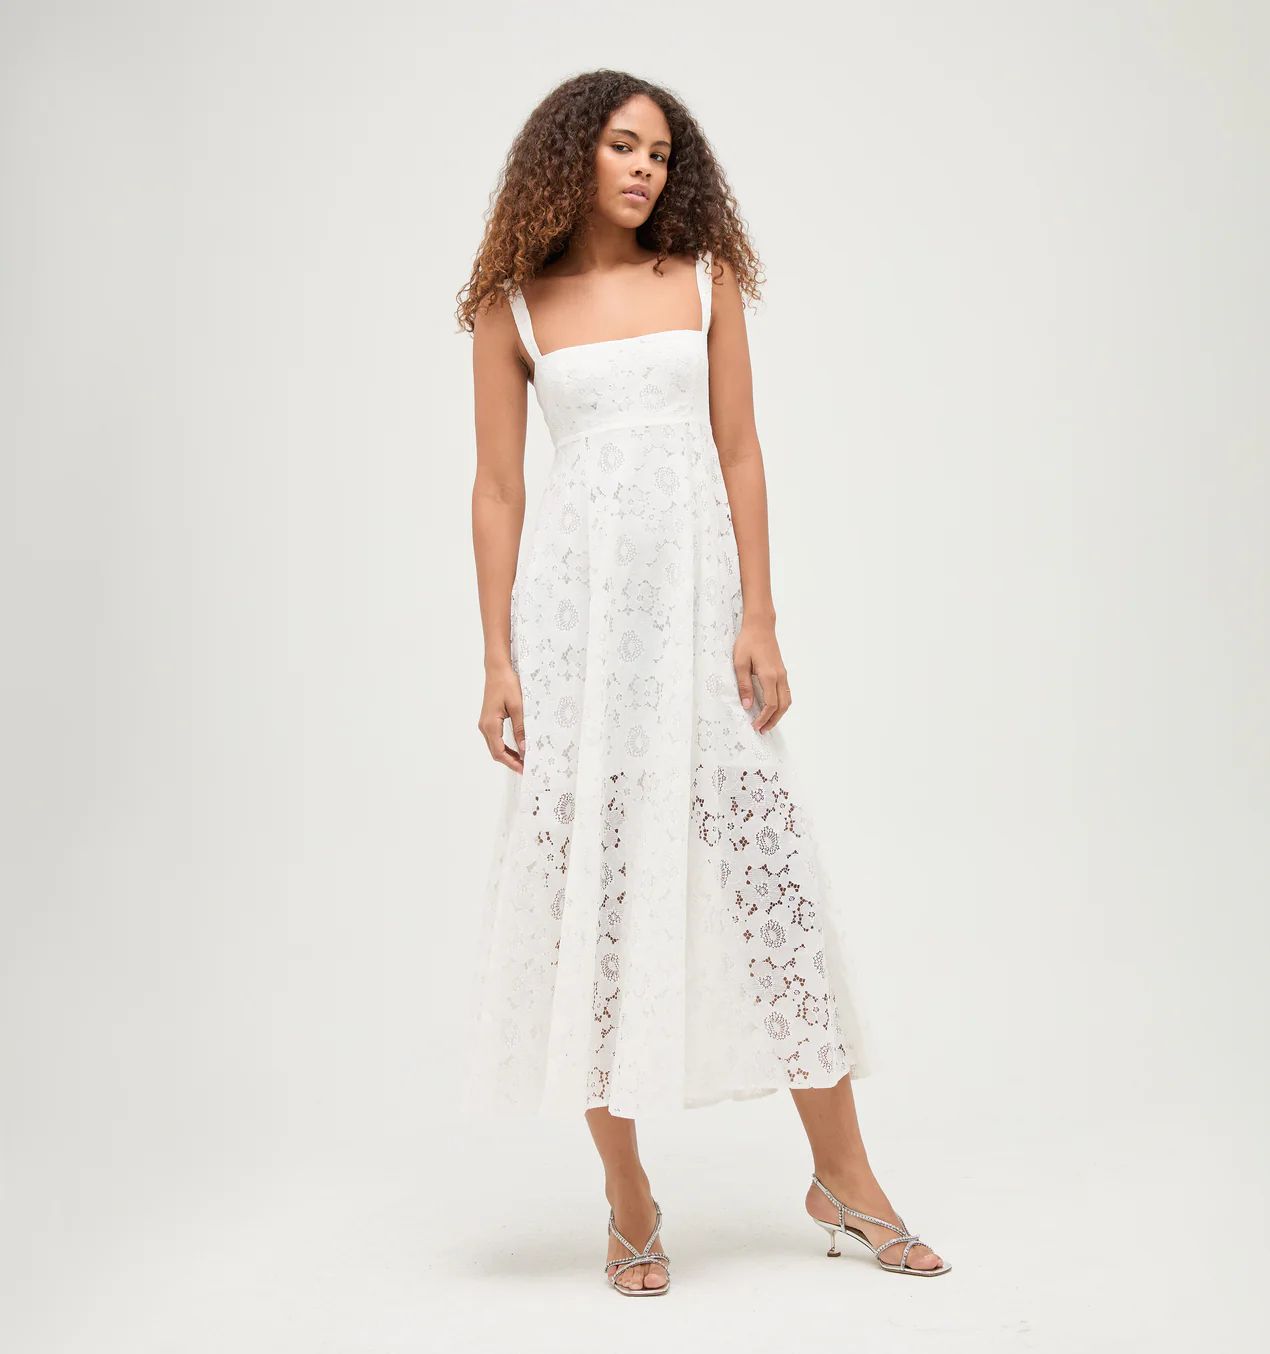 The Lace Rowena Dress - White Floral Lace | Hill House Home